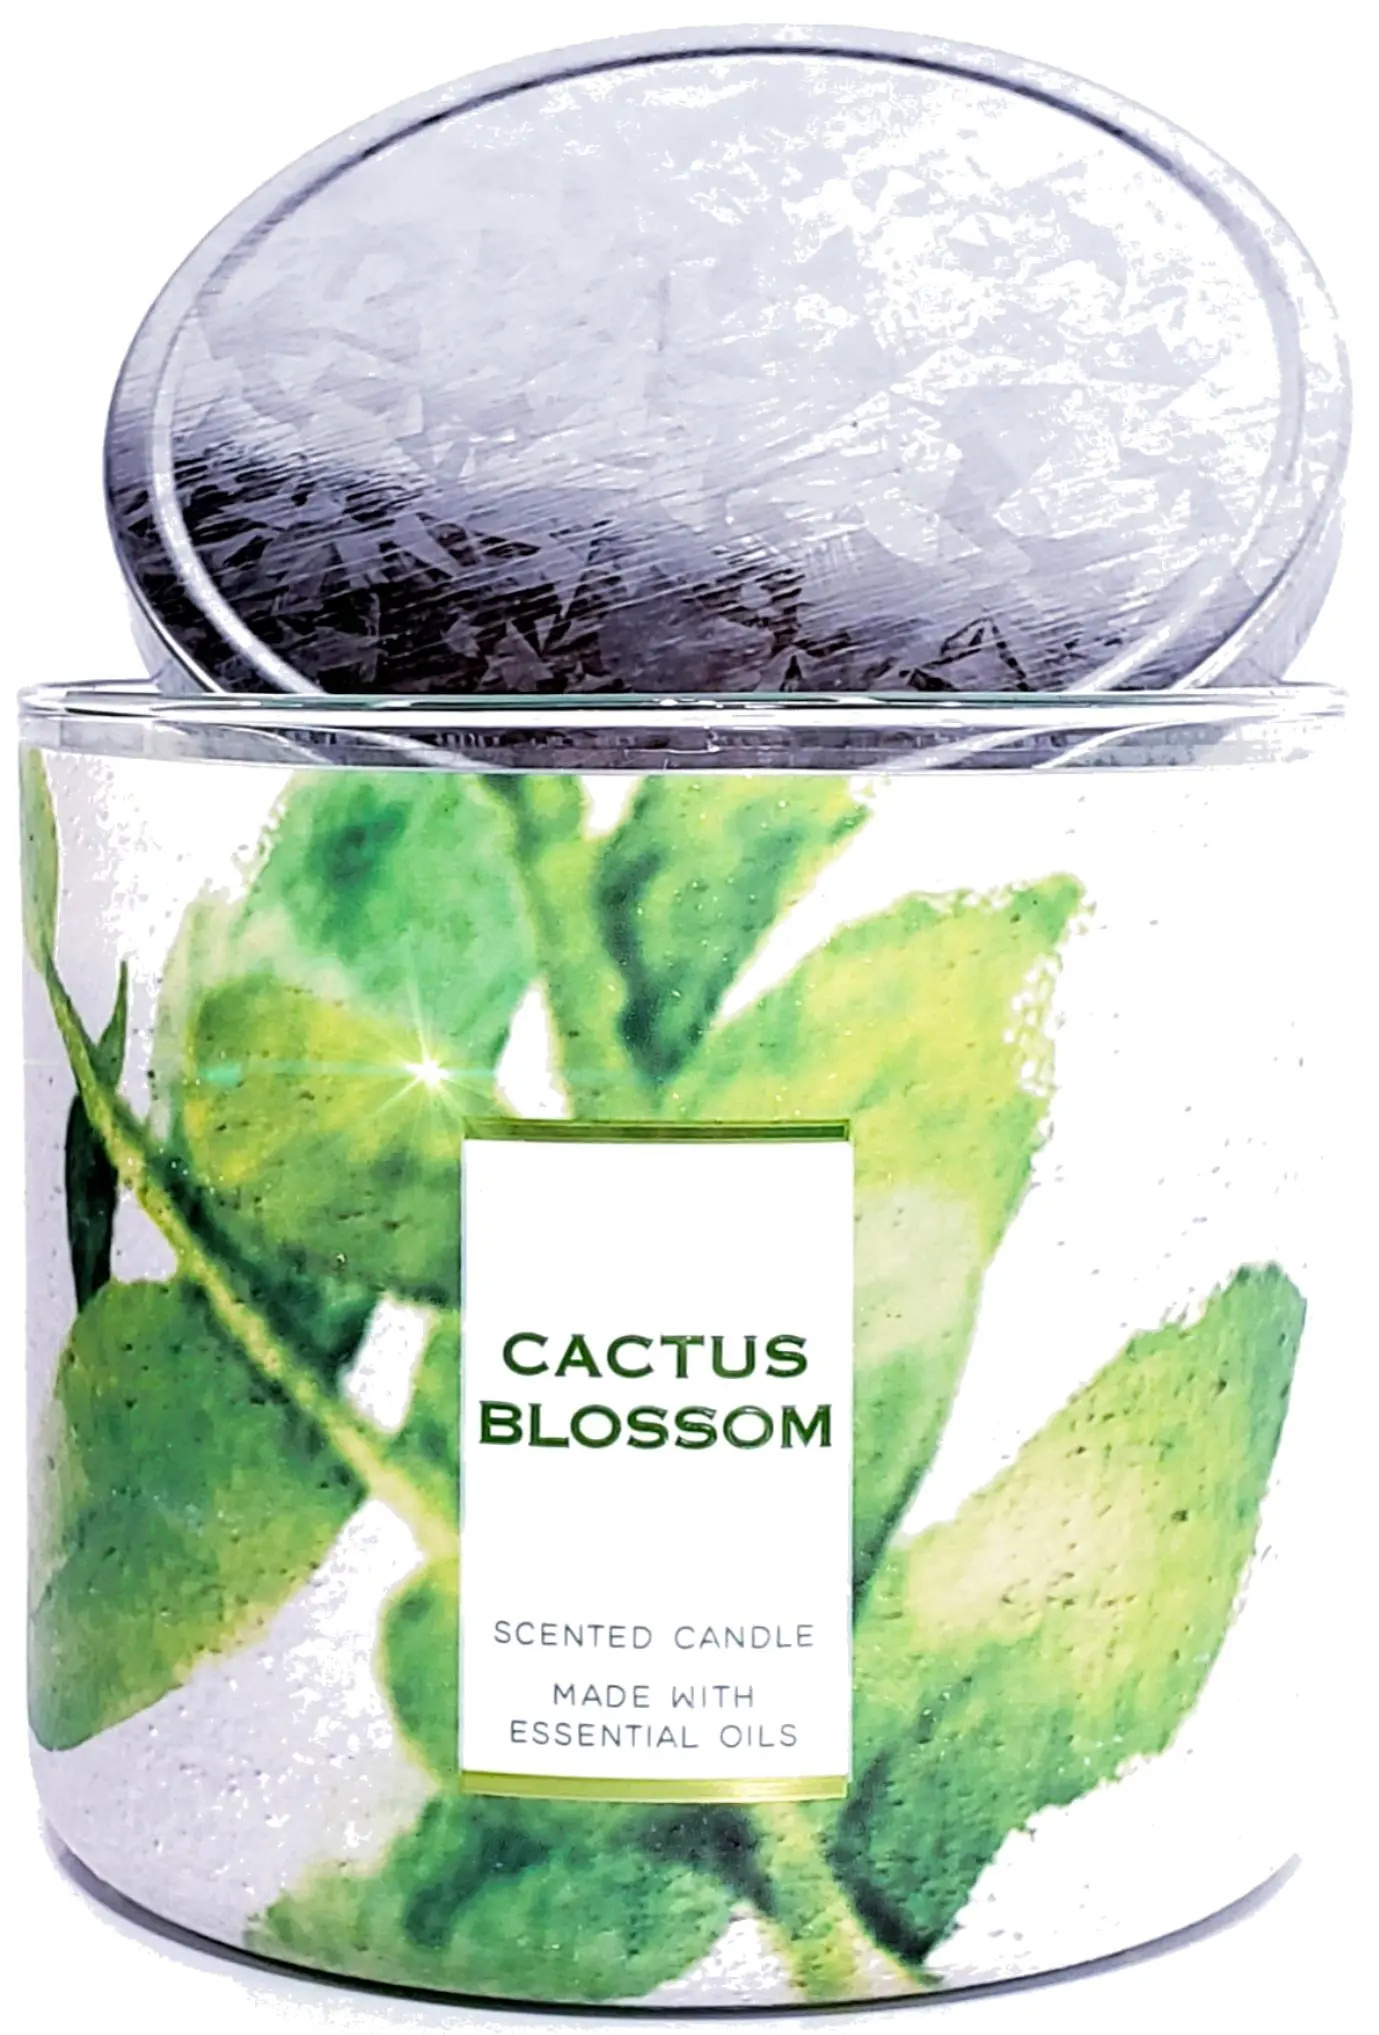 Cactus Blossom 3 Wick Candle Tropical Design / Homestyle Lid